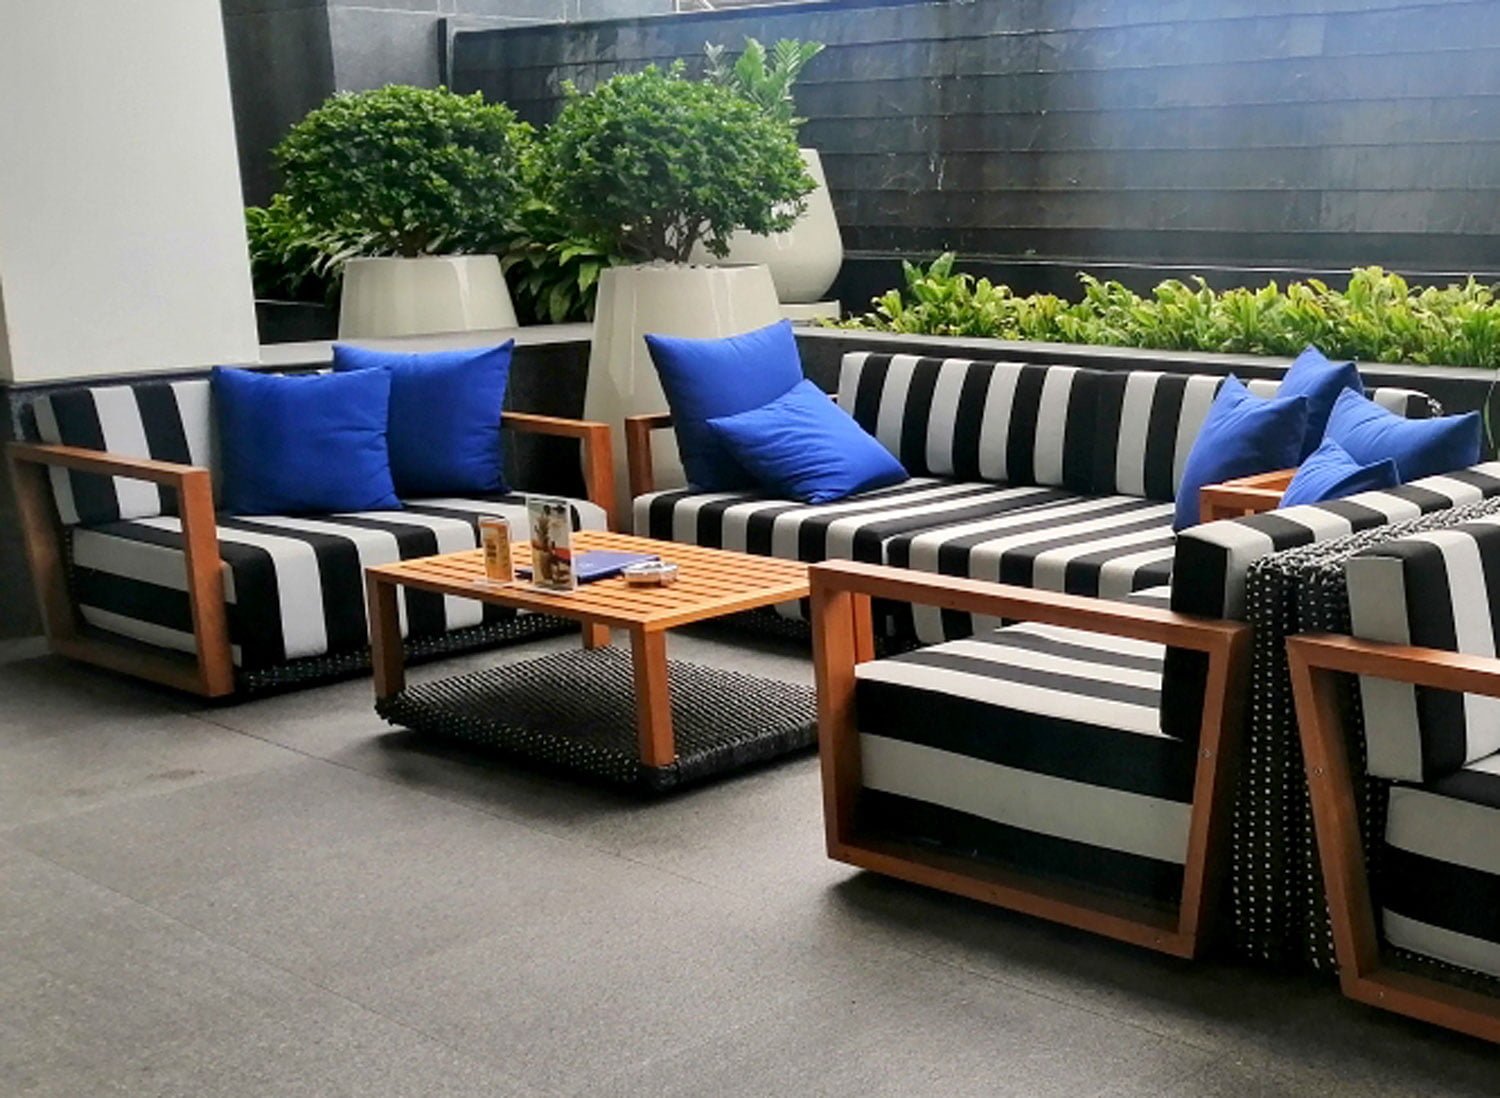 Custom Porch Cushions: Enhance Your Outdoor Space with Style and Comfort